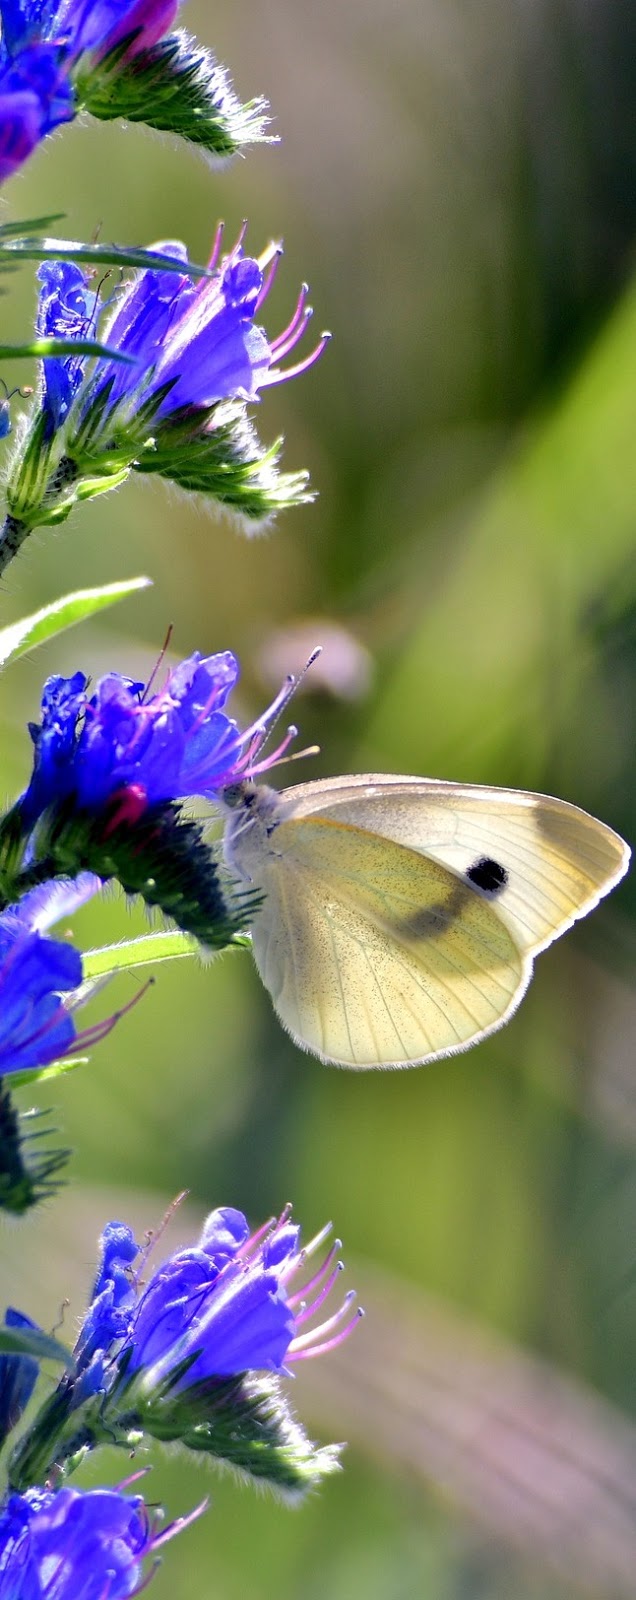 A cabbage white butterfly.